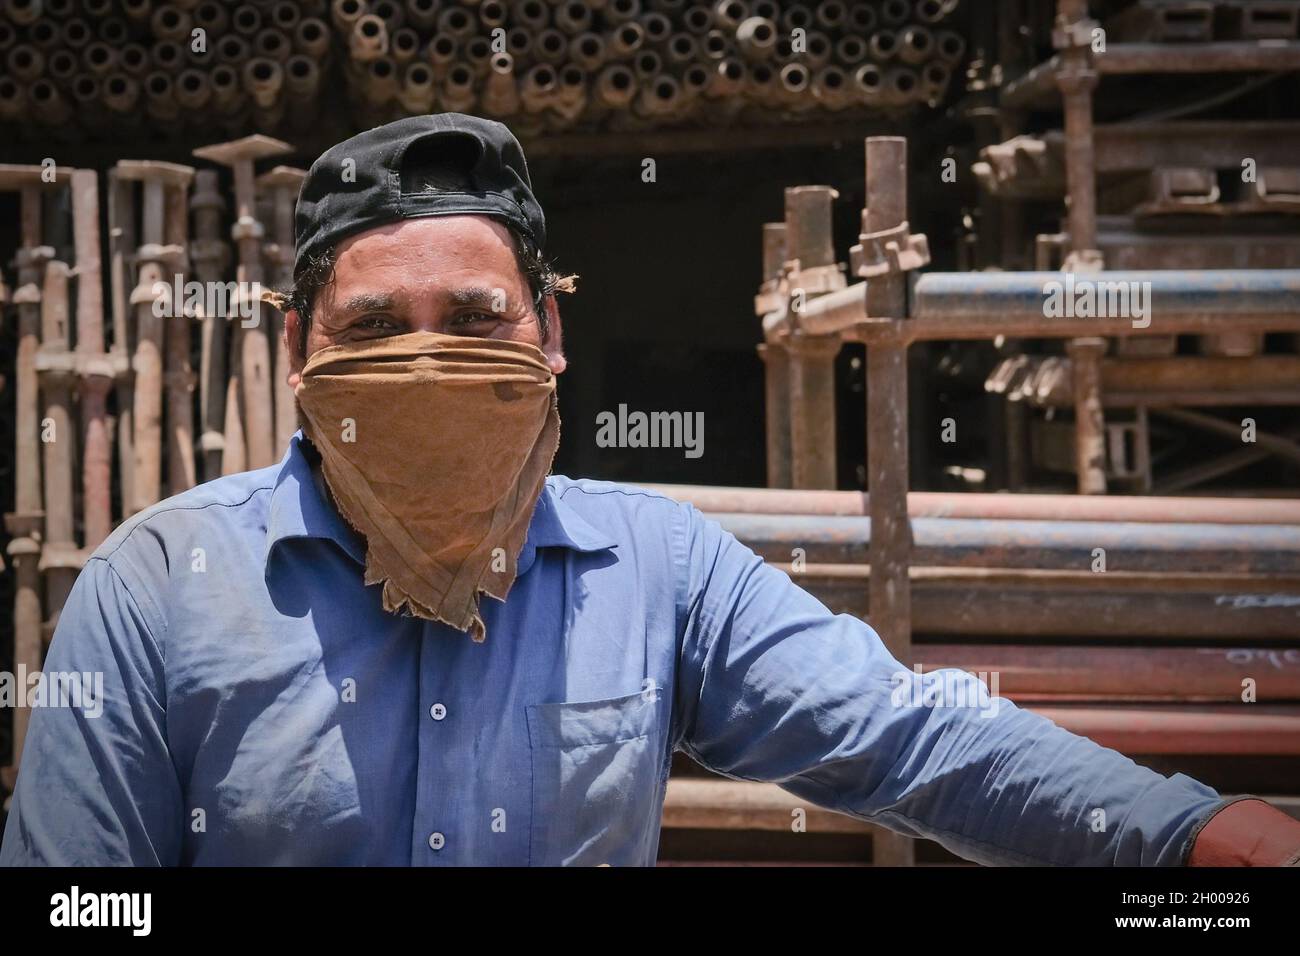 Mature middle eastern migrant laborer wearing wearing blue uniform and dirty mask working for scrap metal supply warehouse for recycling  Stock Photo